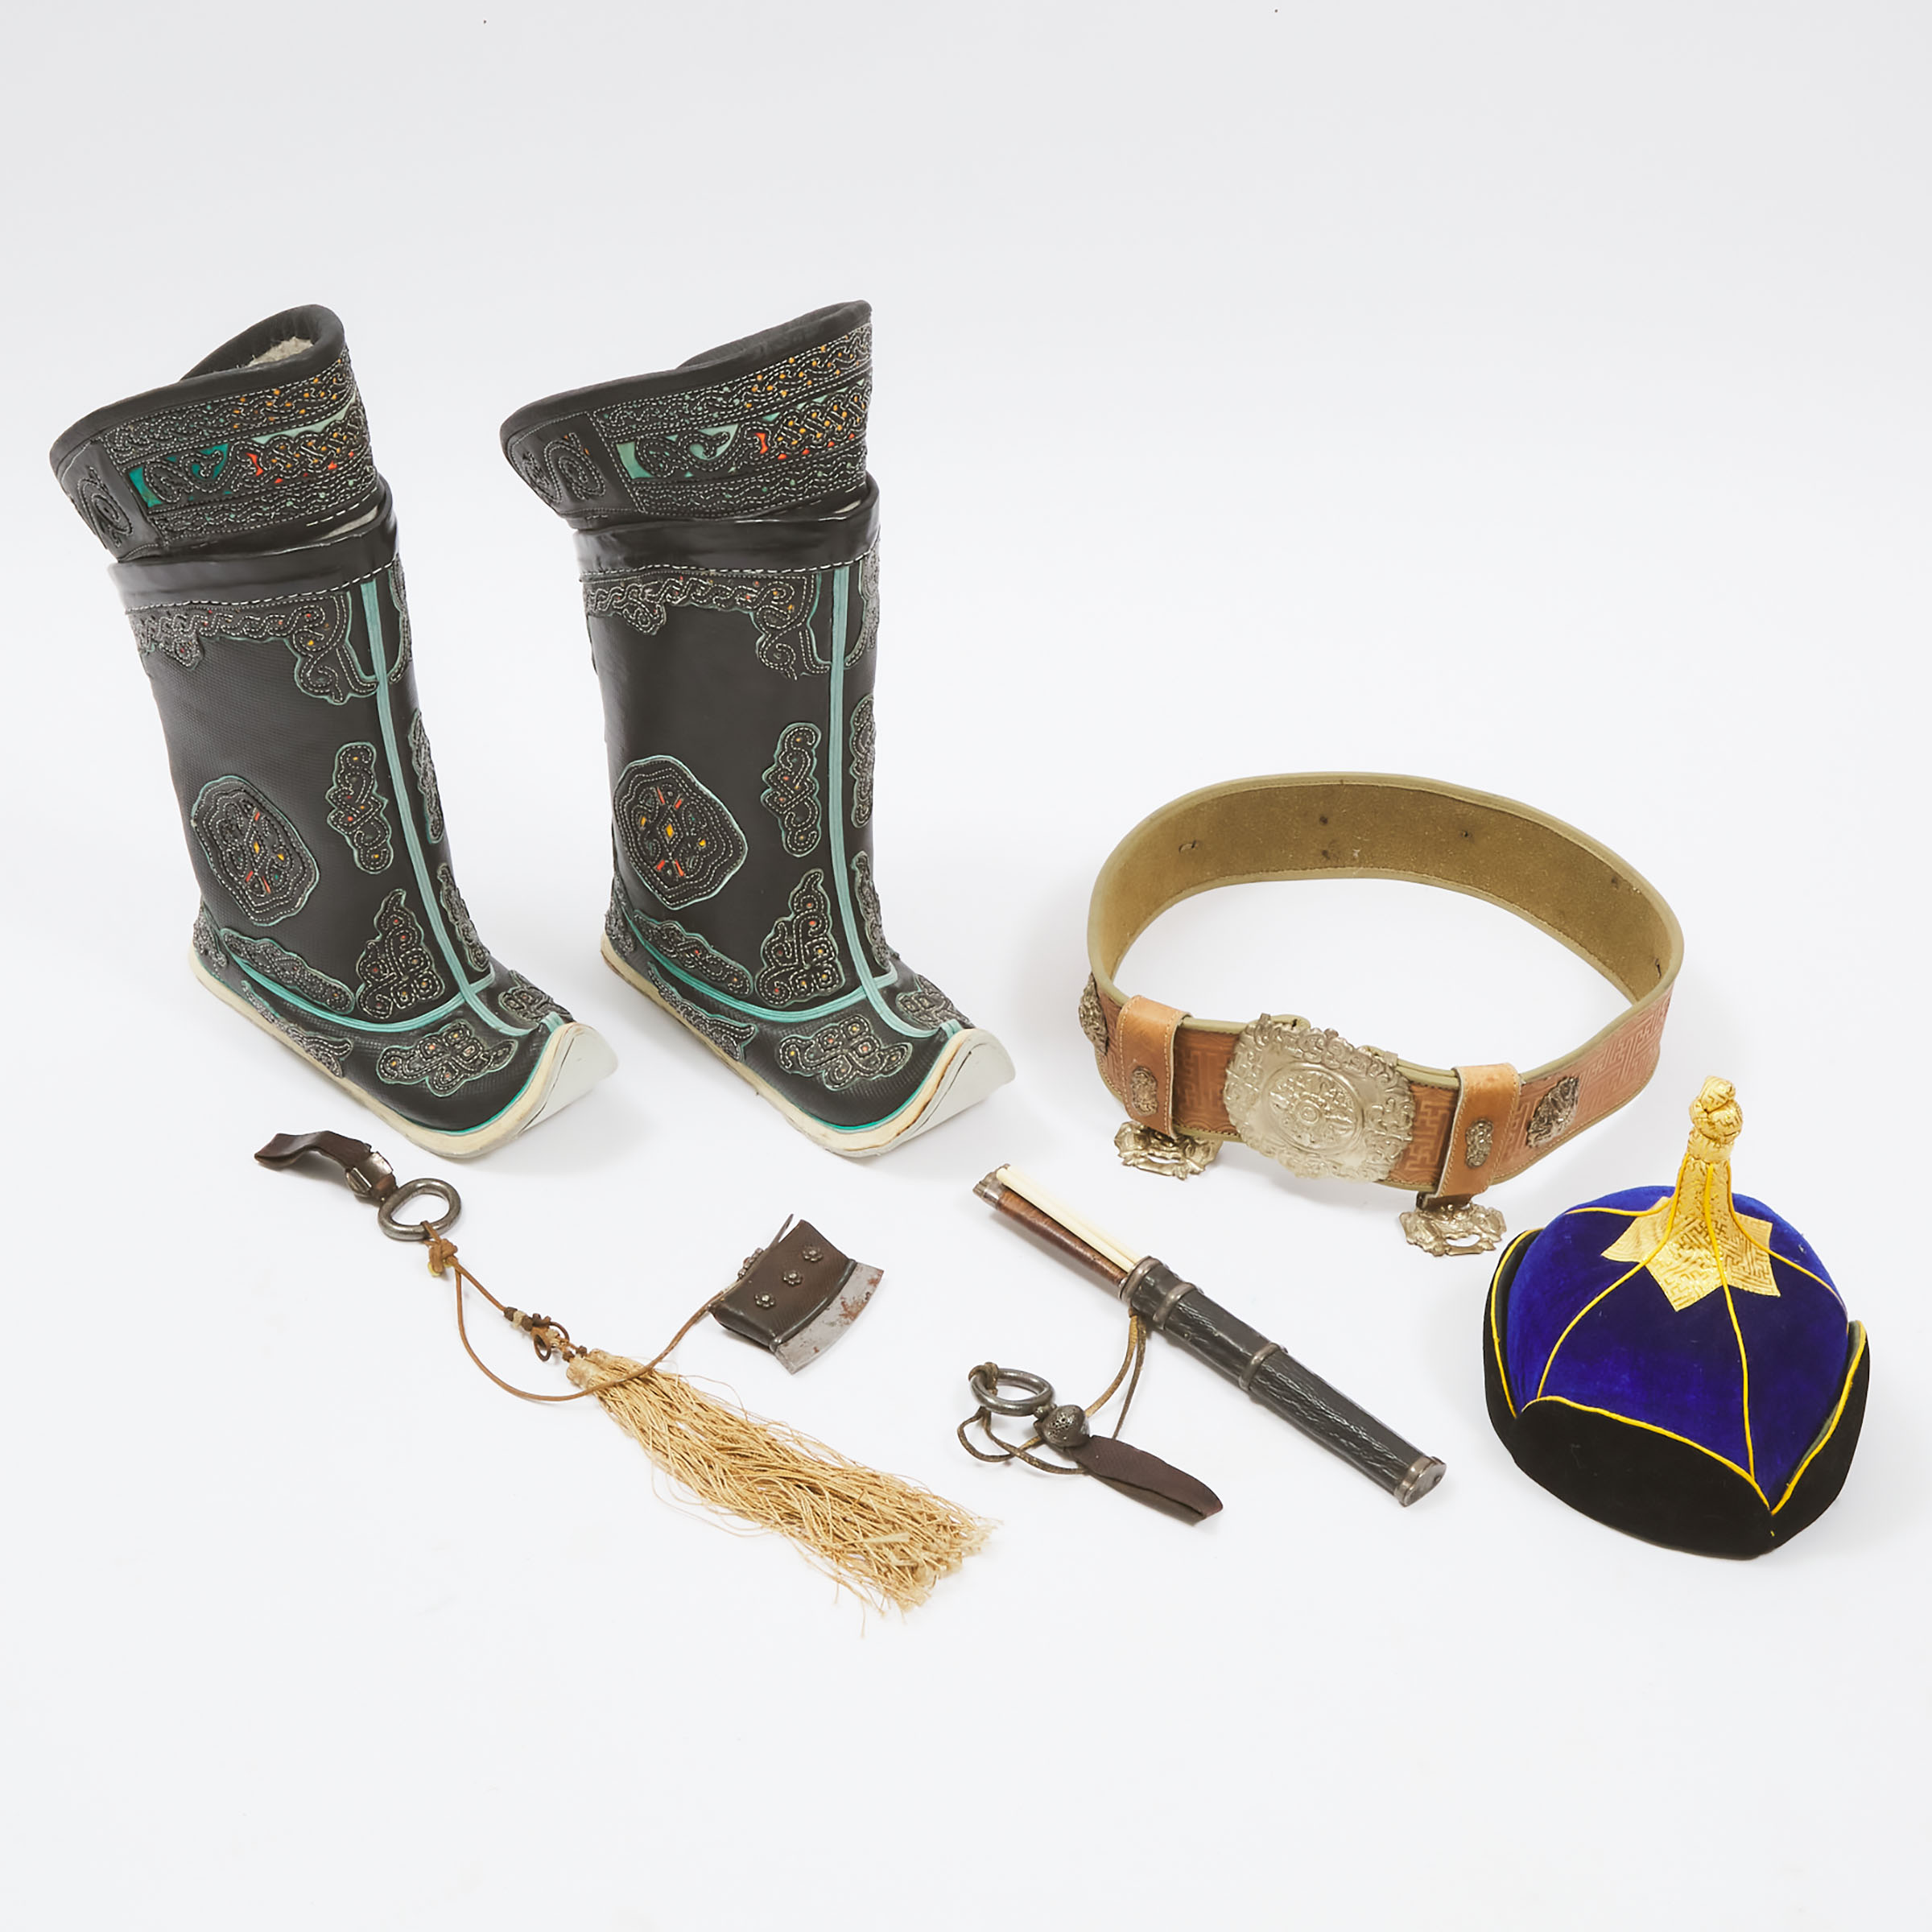 Mongolian Traditional Hat, Boots (Gutals), Belt, Utility Knife and Tinder Pouch with Striker (Chuckmuck), early to mid 20th century